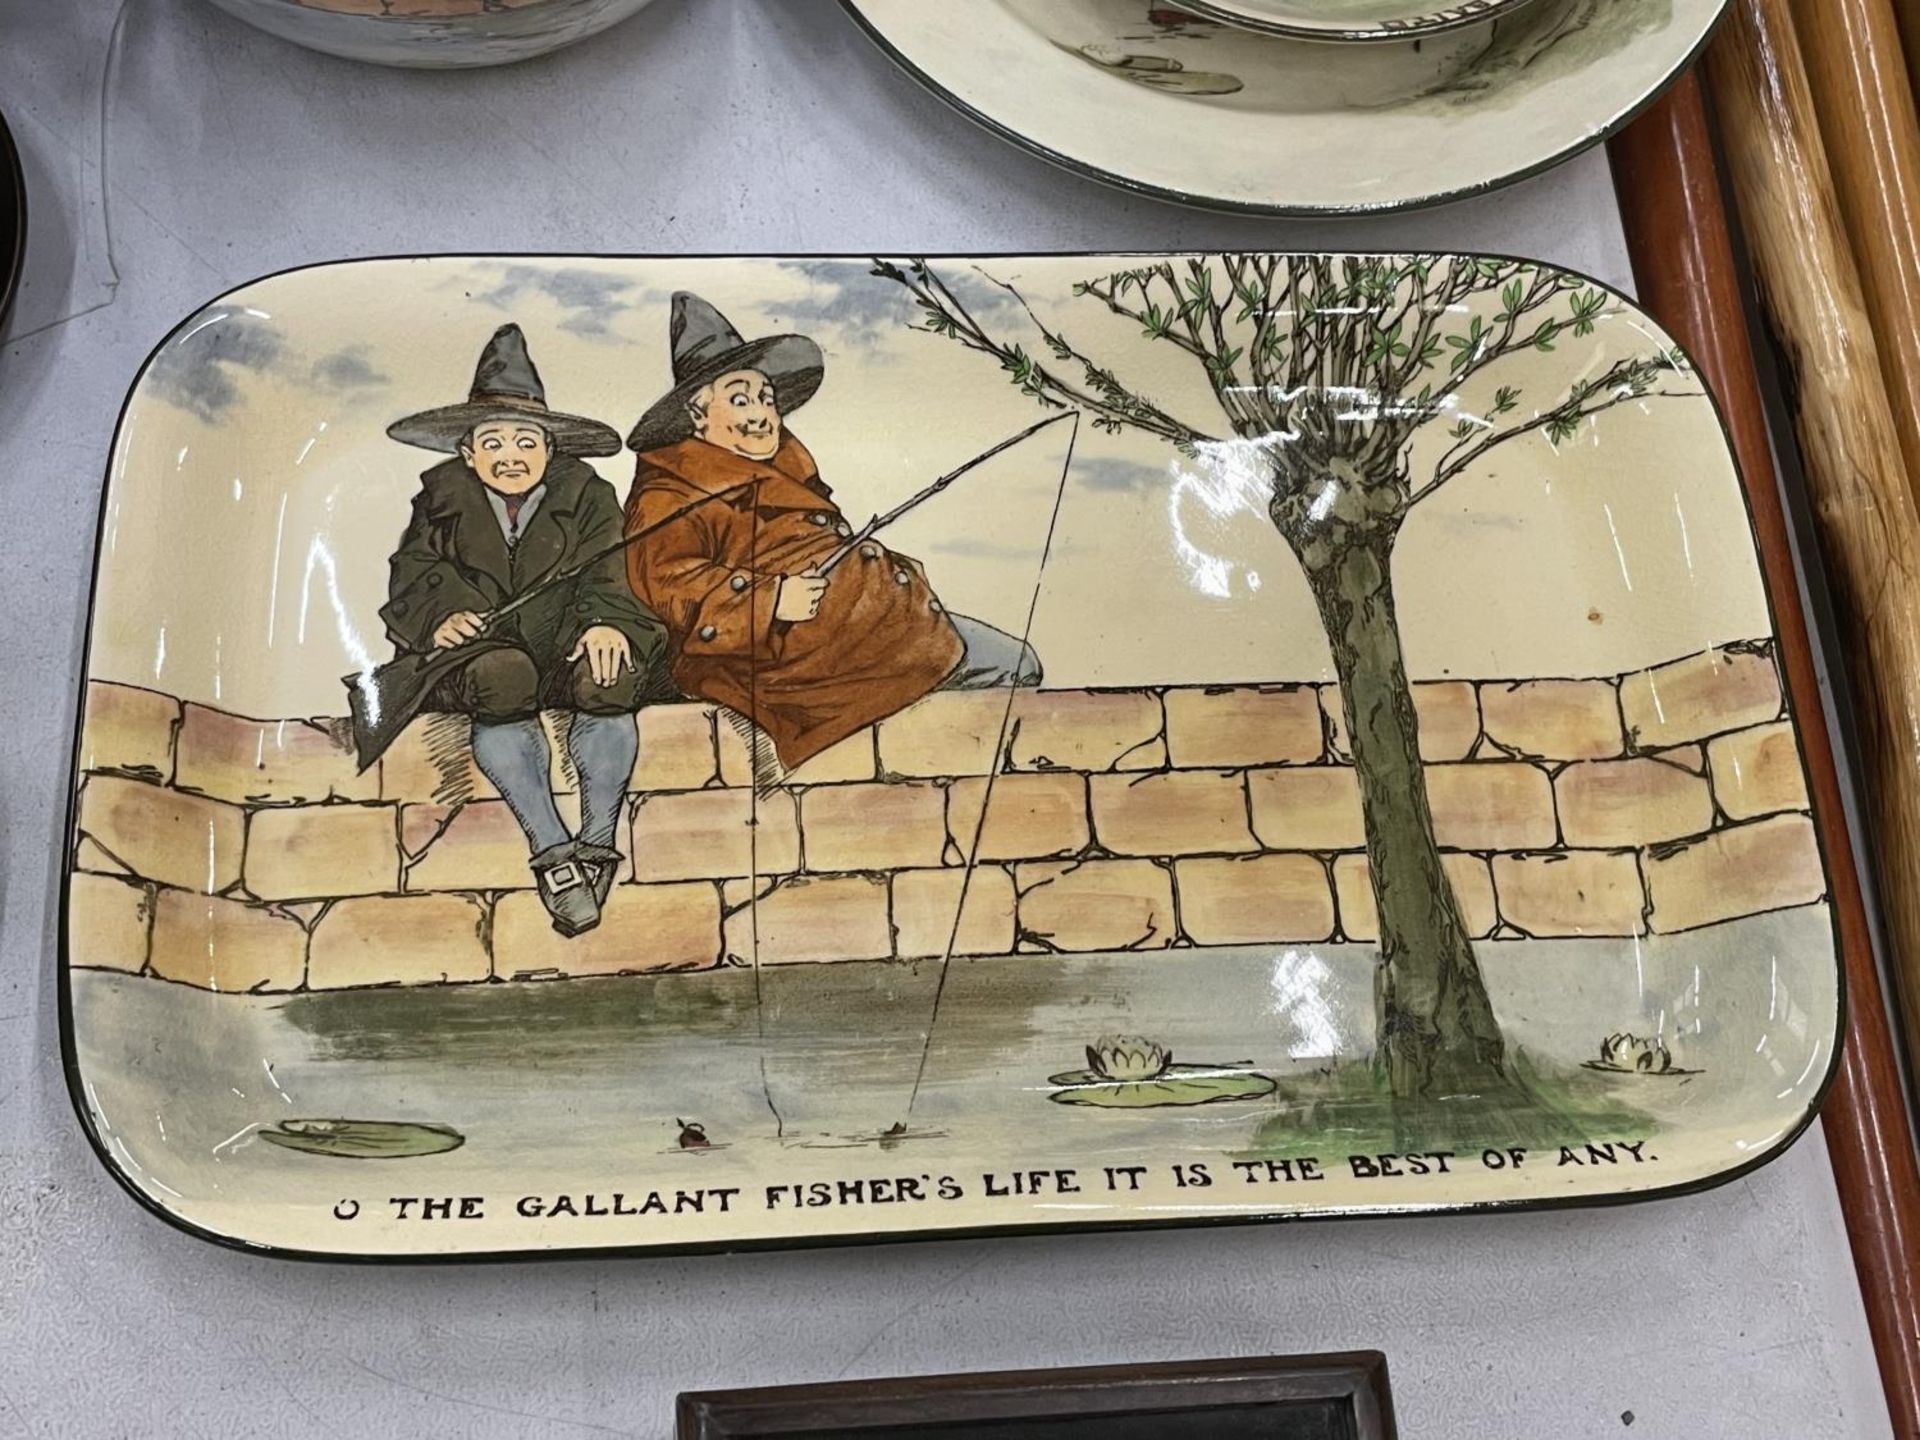 A QUANTITY OF ROYAL DOULTON 'THE GALLANT FISHERS' SERIES WARE TO INCLUDE PLATES, BOWLS, TEAPOT, CUPS - Image 2 of 7